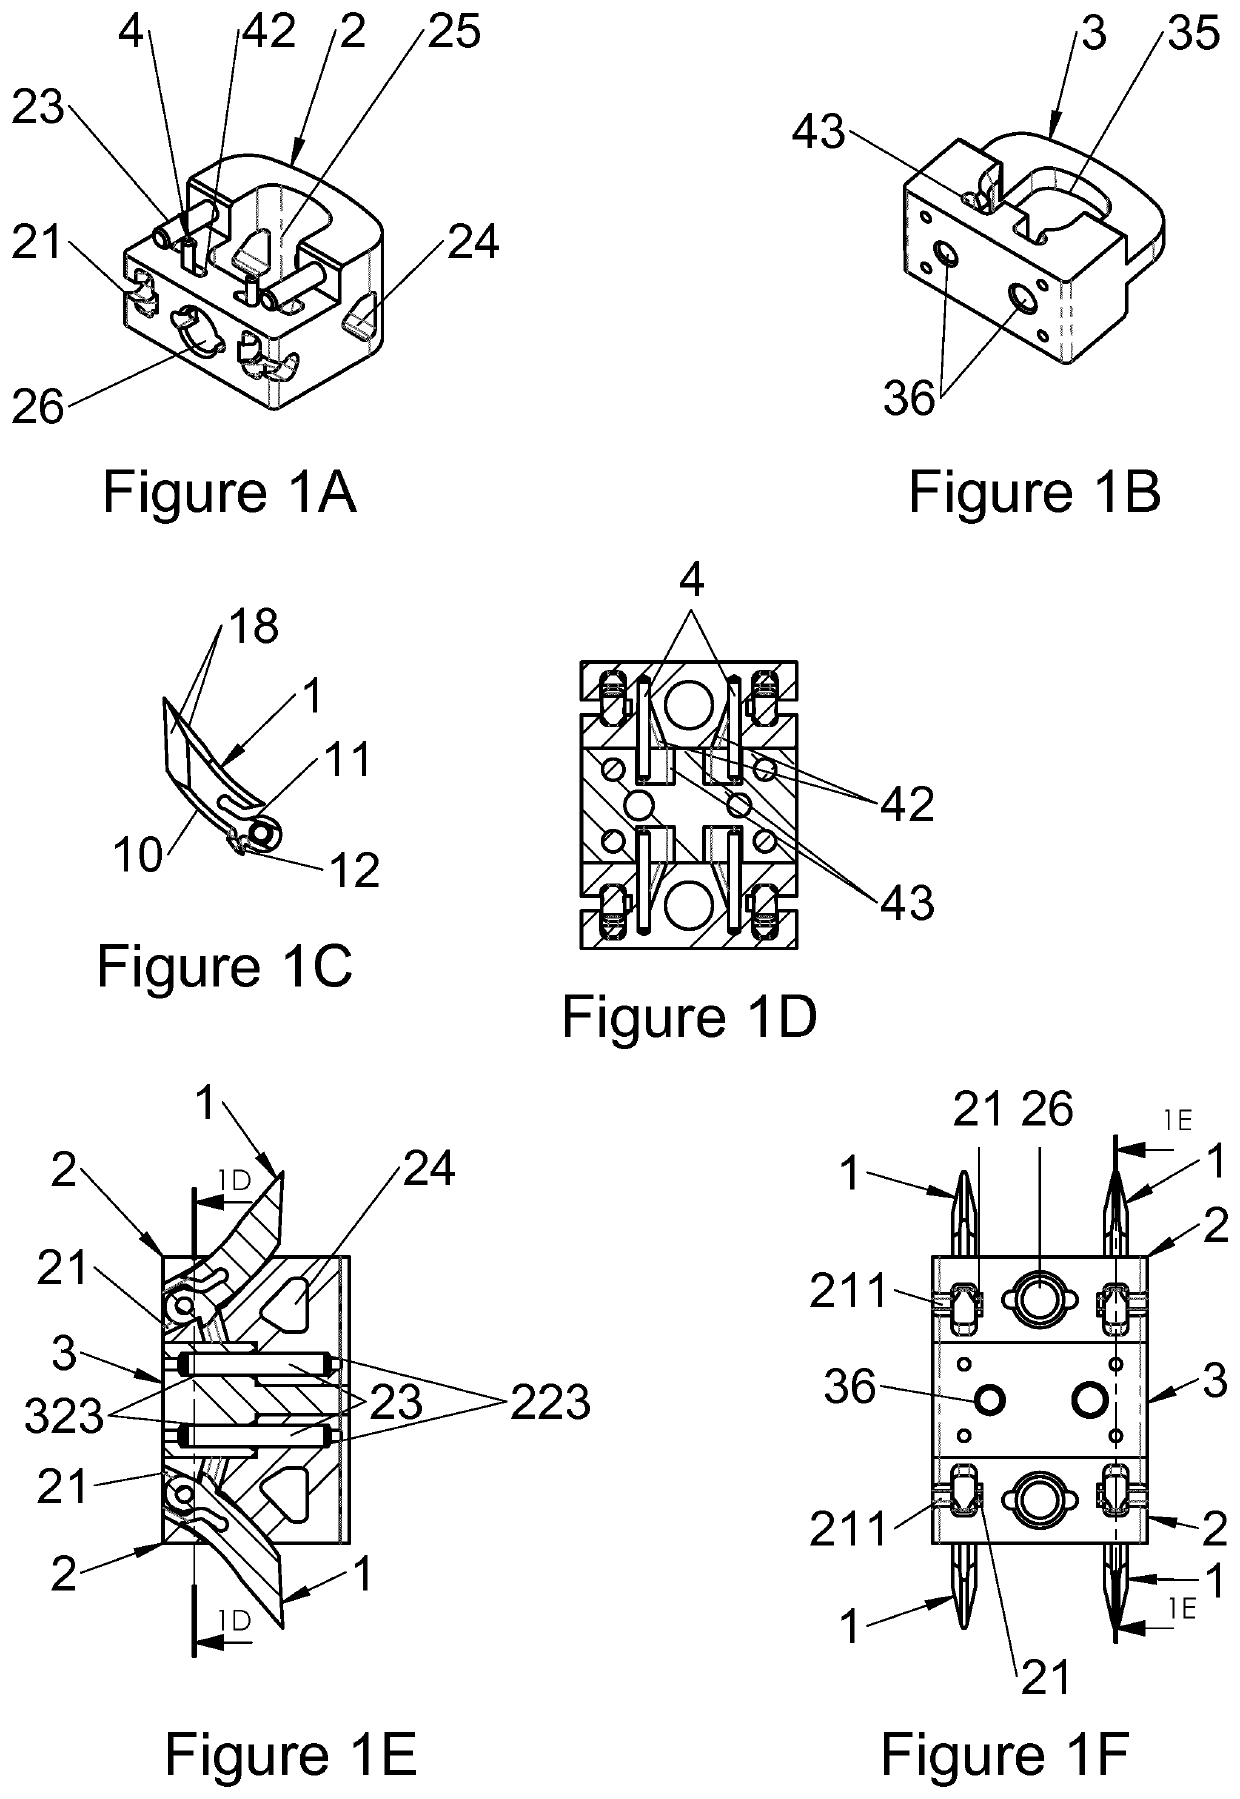 Vertebral implant, device for vertebral attachment of the implant and instrumentation for implantation thereof